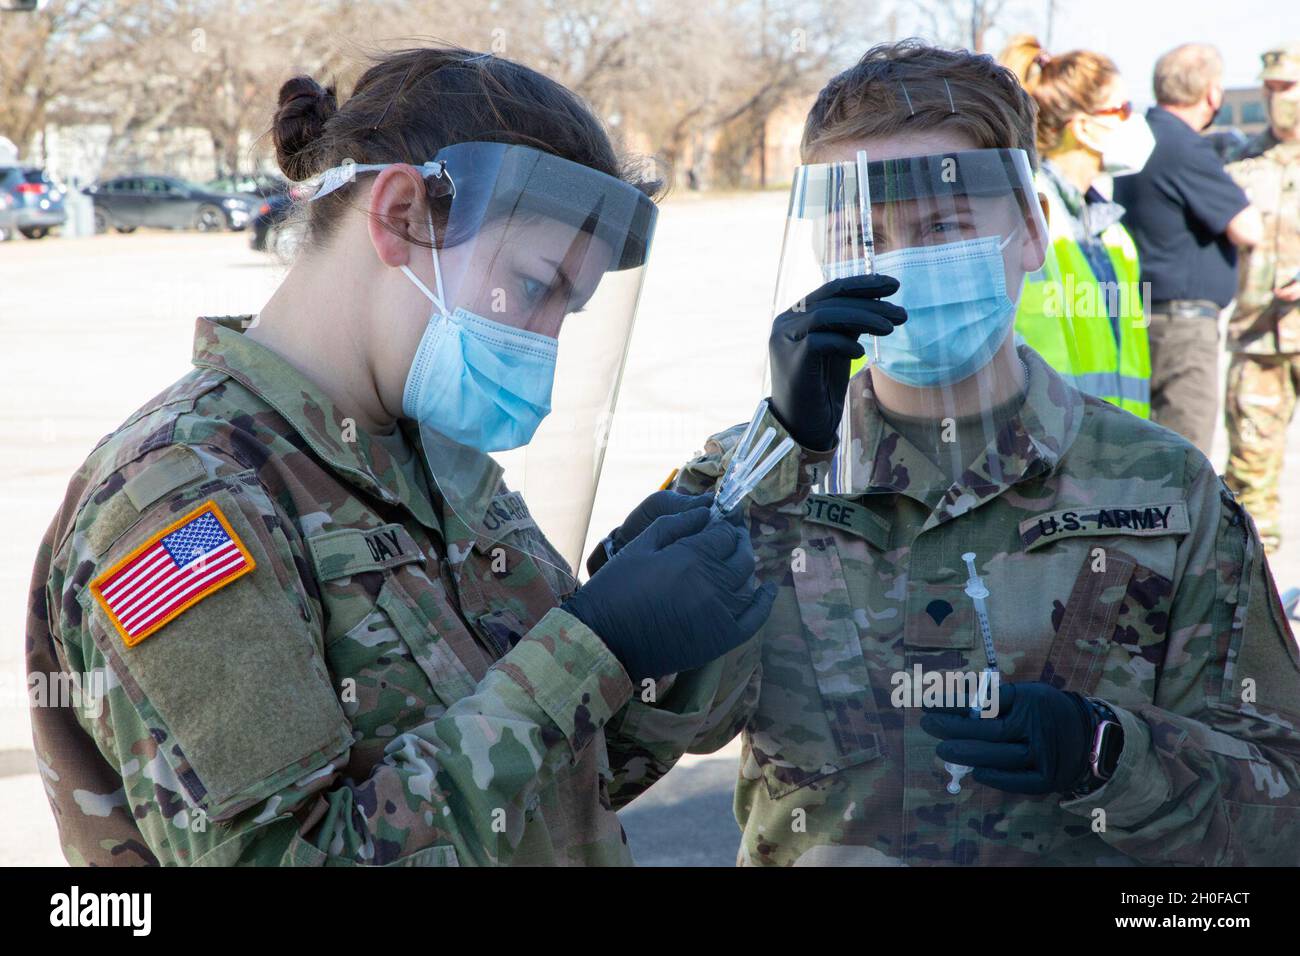 U.S. Army Spc. Haleigh Day (left) and Spc. Zoe Festge (right), 1st Battalion, 63rd Armored Regiment, 2nd Armor Brigade Combat Team, 1st Infantry Division, check the labels on the vaccine syringes at the Fair Park COVID-19 Community Vaccination Center in Dallas, Texas, Feb. 24, 2021. The Soldiers, deployed from Fort Riley, Kansas, support civilian medical personnel in administering COVID-19 vaccines. U.S. Northern Command, through U.S. Army North, remains committed to providing continued, flexible Department of Defense support to the Federal Emergency Management Agency as part of the whole-of-g Stock Photo